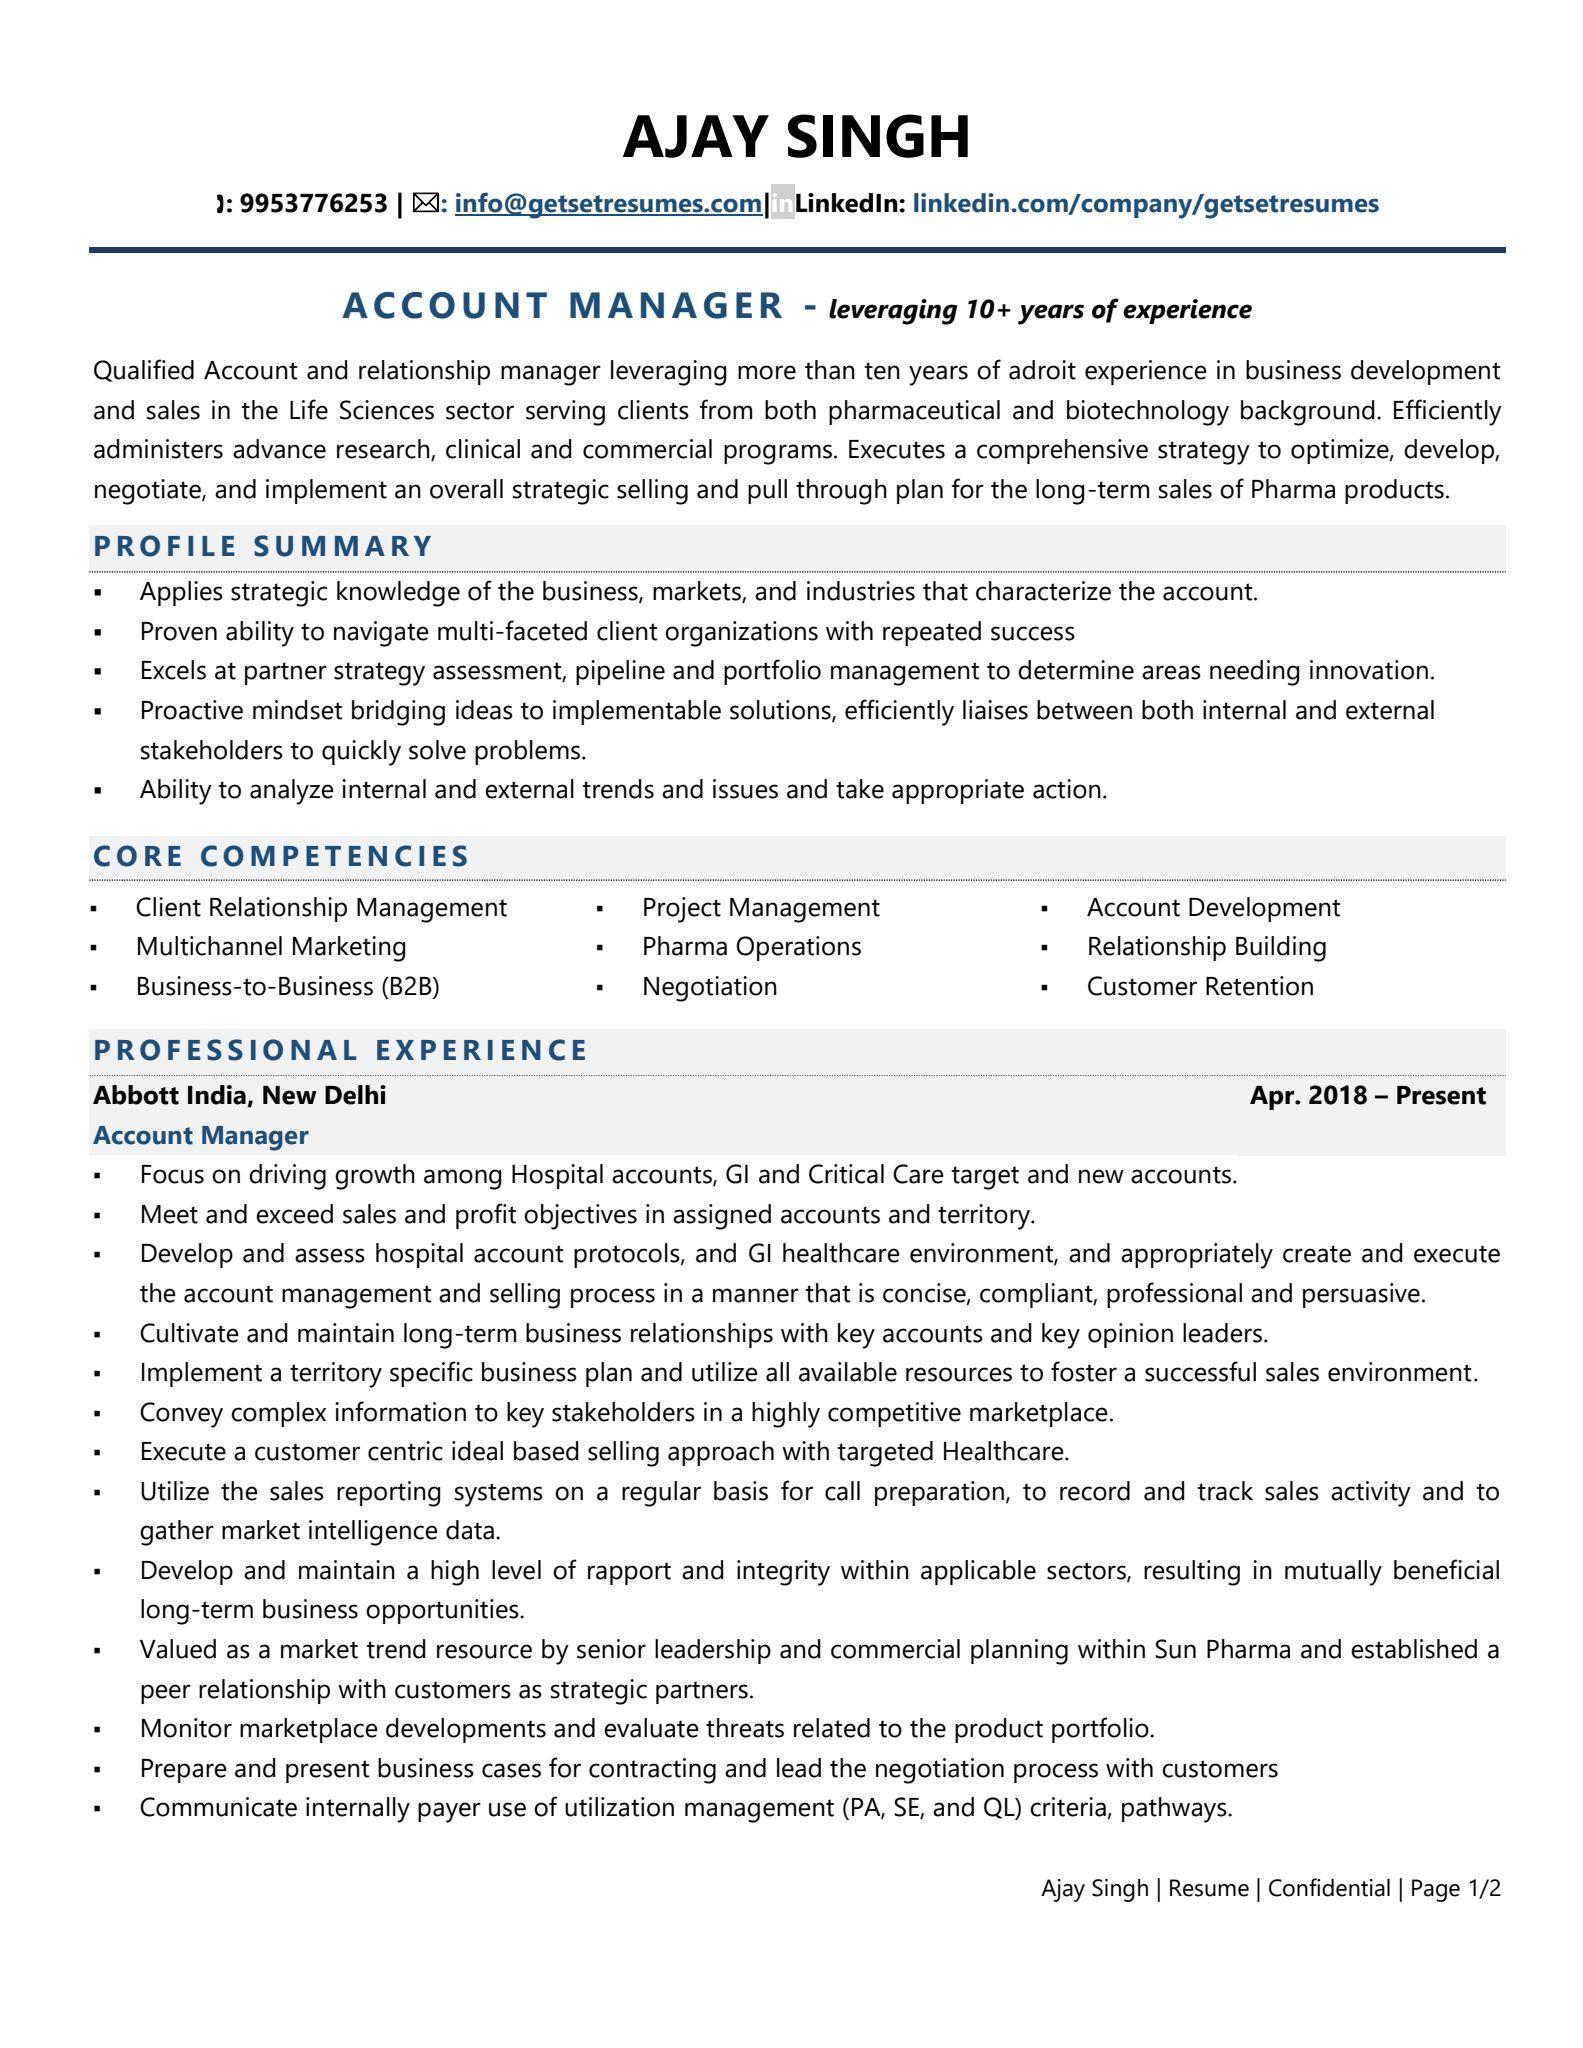 Account Manager (Pharma) - Resume Example & Template